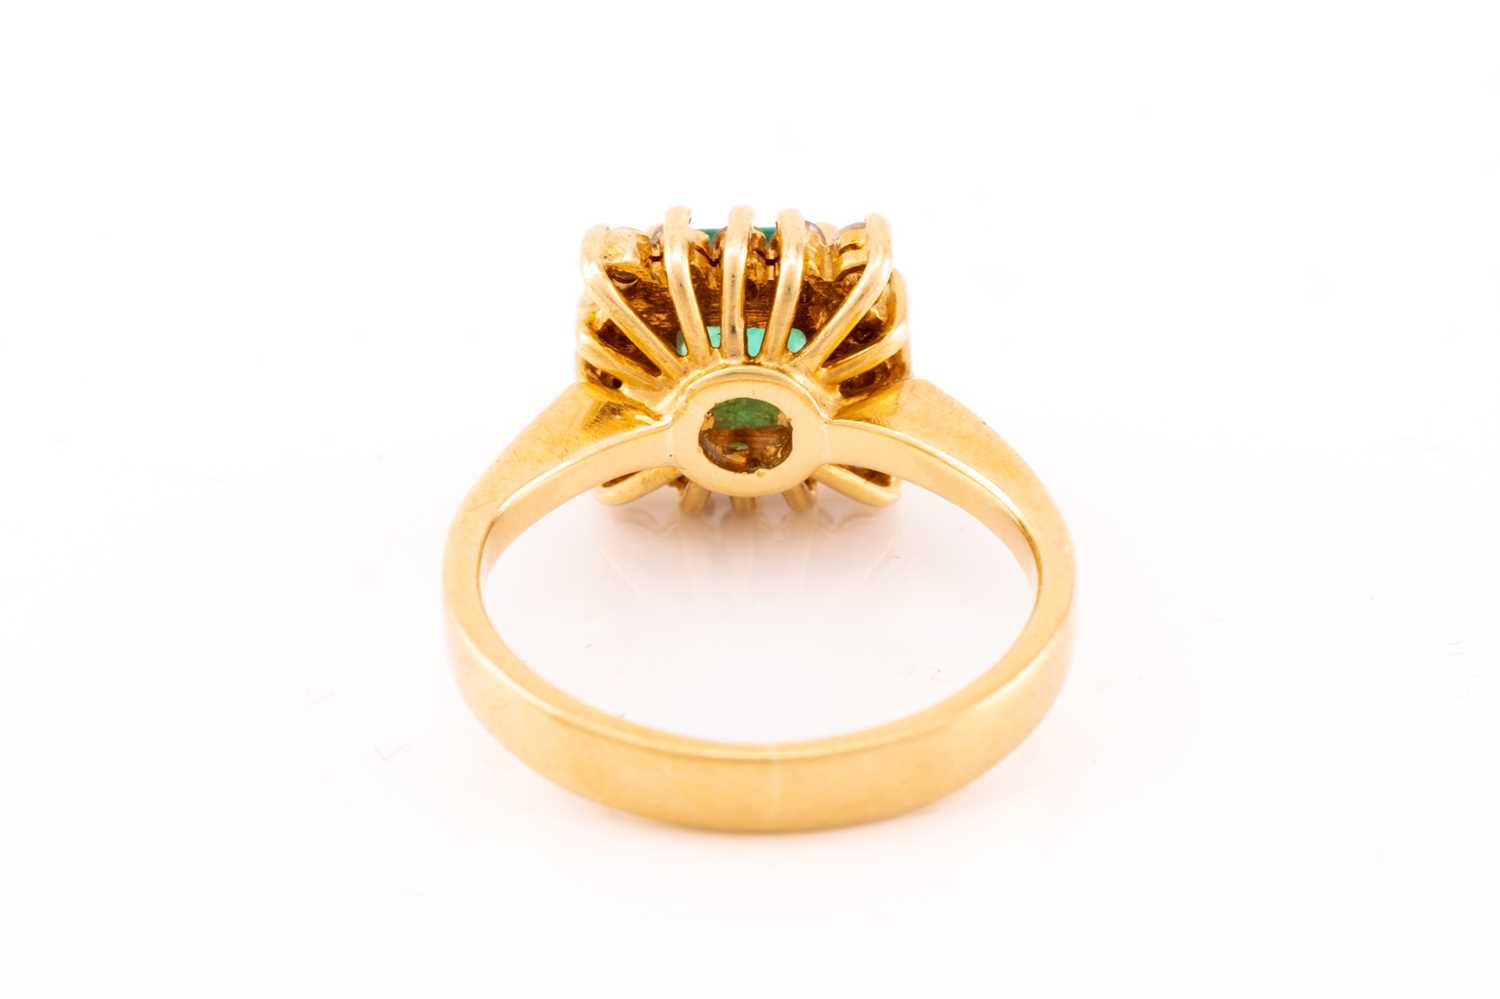 An emerald and diamond entourage ring, centred with an emerald-cut emerald in bright green colour, - Image 4 of 5